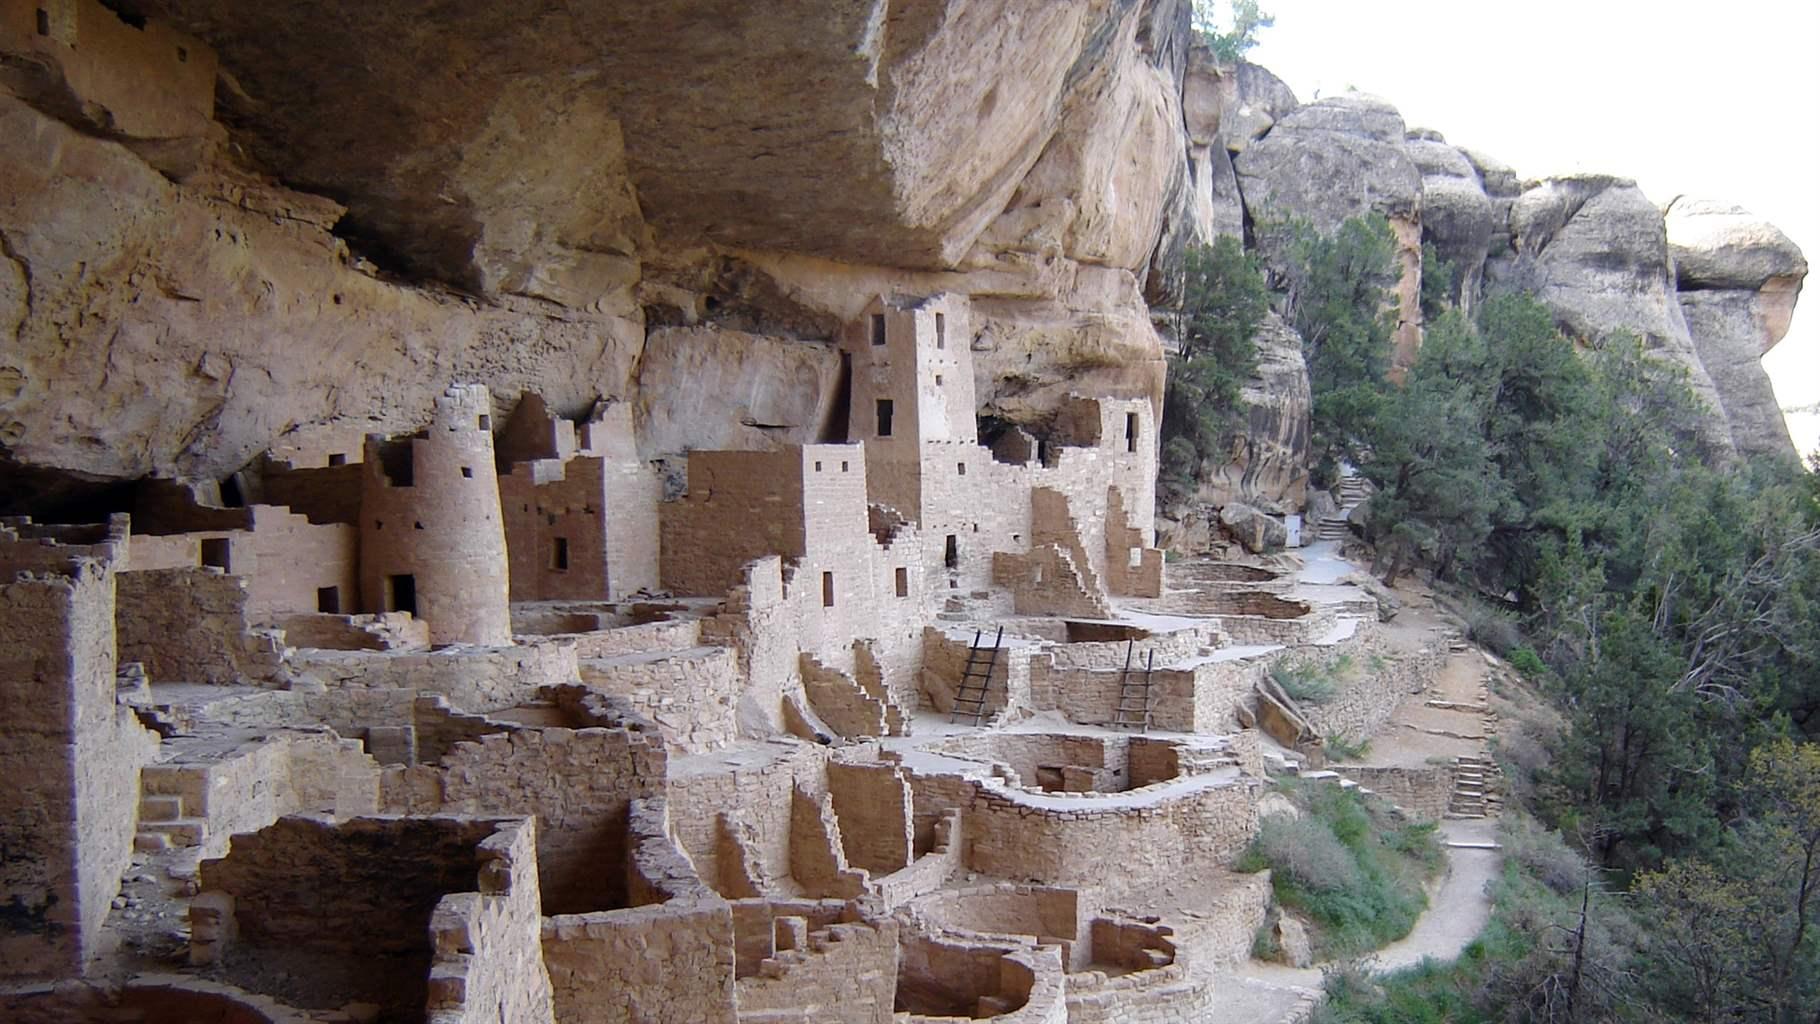  The National Park Service conserves a wide variety of sites, including sacred Indigenous homesteads such as these in Mesa Verde National Park in Colorado.